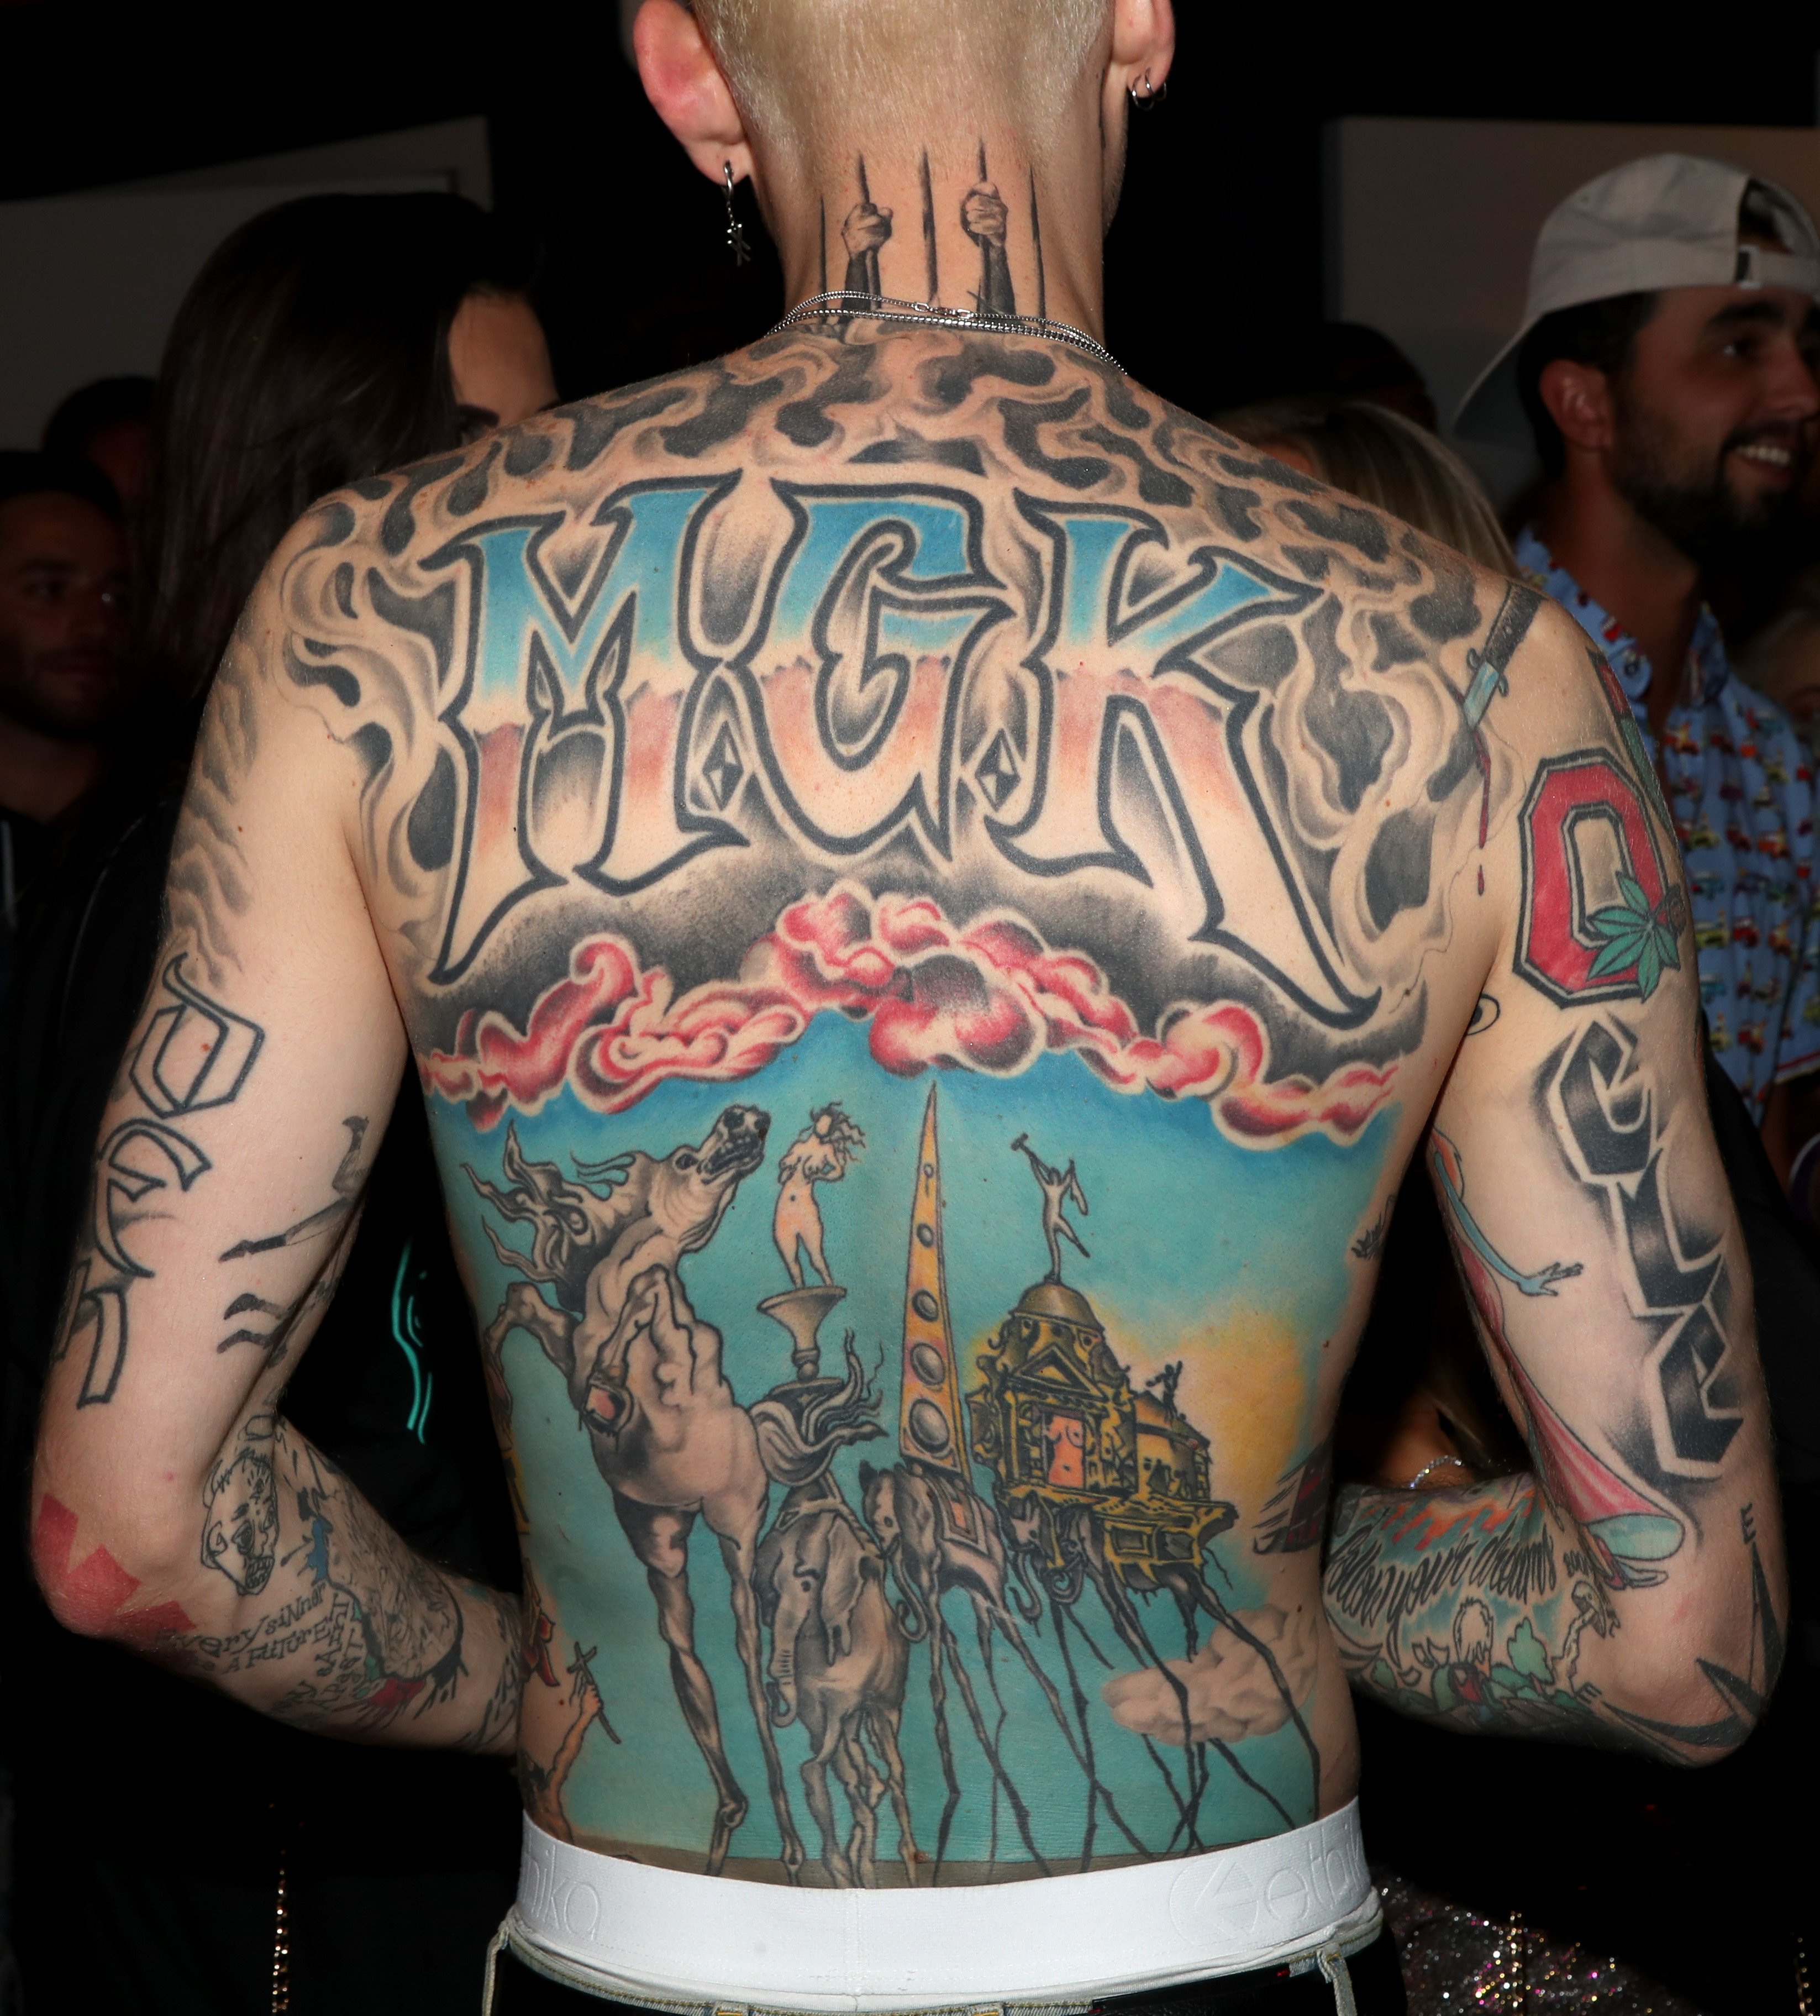 Machine Gun Kelly's "MGK" and Salvador Dali tattoo fully covering the back of his torso while "DEN" and "CLE" tattooed on the back of his arms. | Source: Getty Images